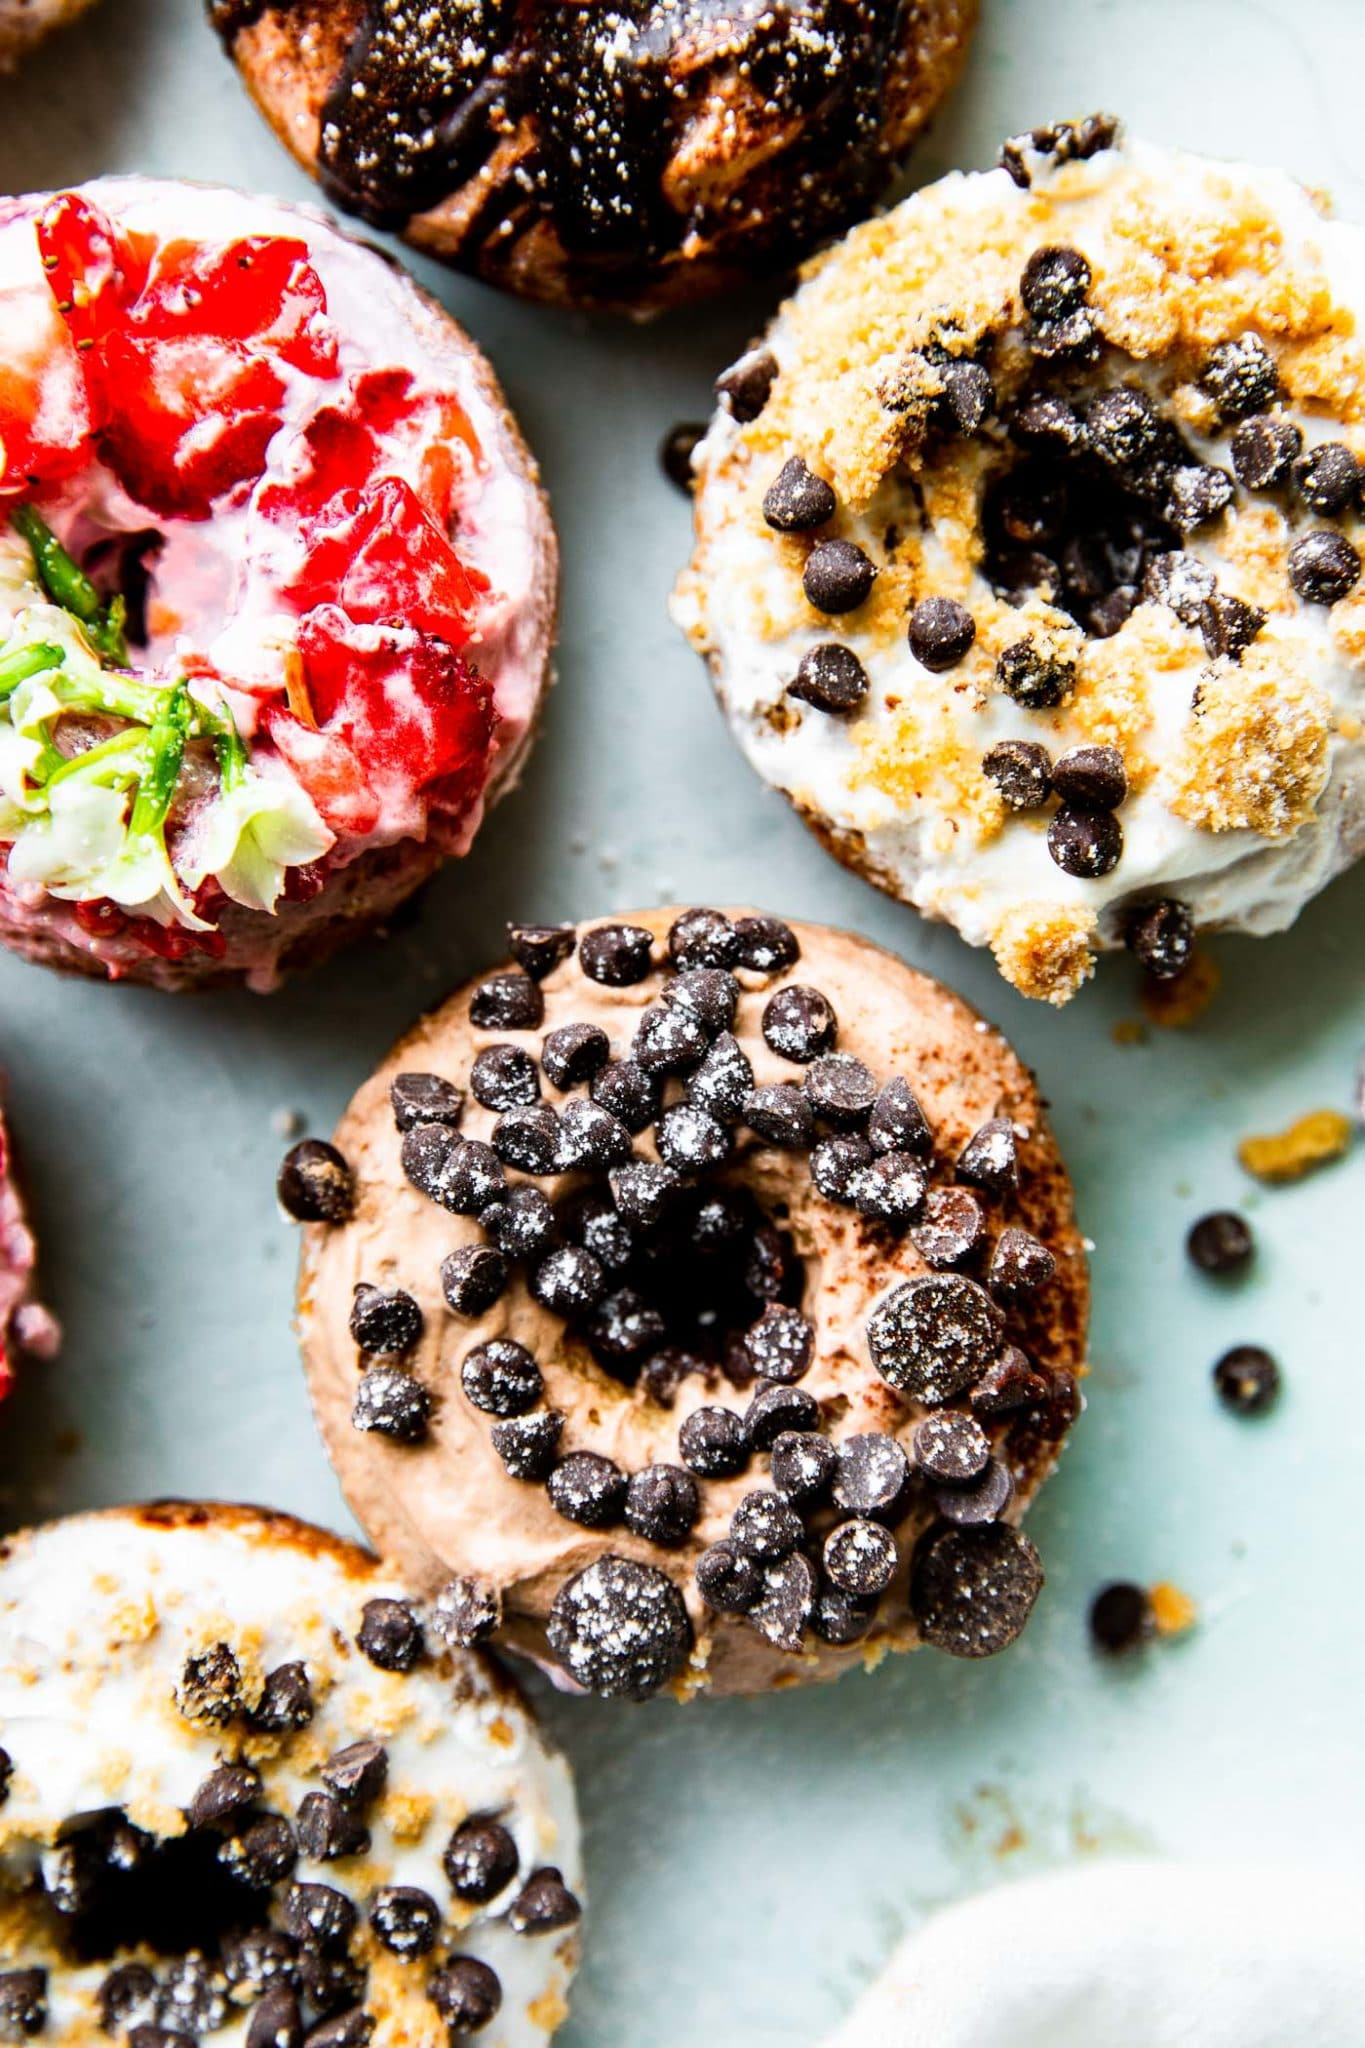 a close up image of vanilla, chocolate, and vanilla vegan baked donuts topped with frosting, chocolate chips, and fruit